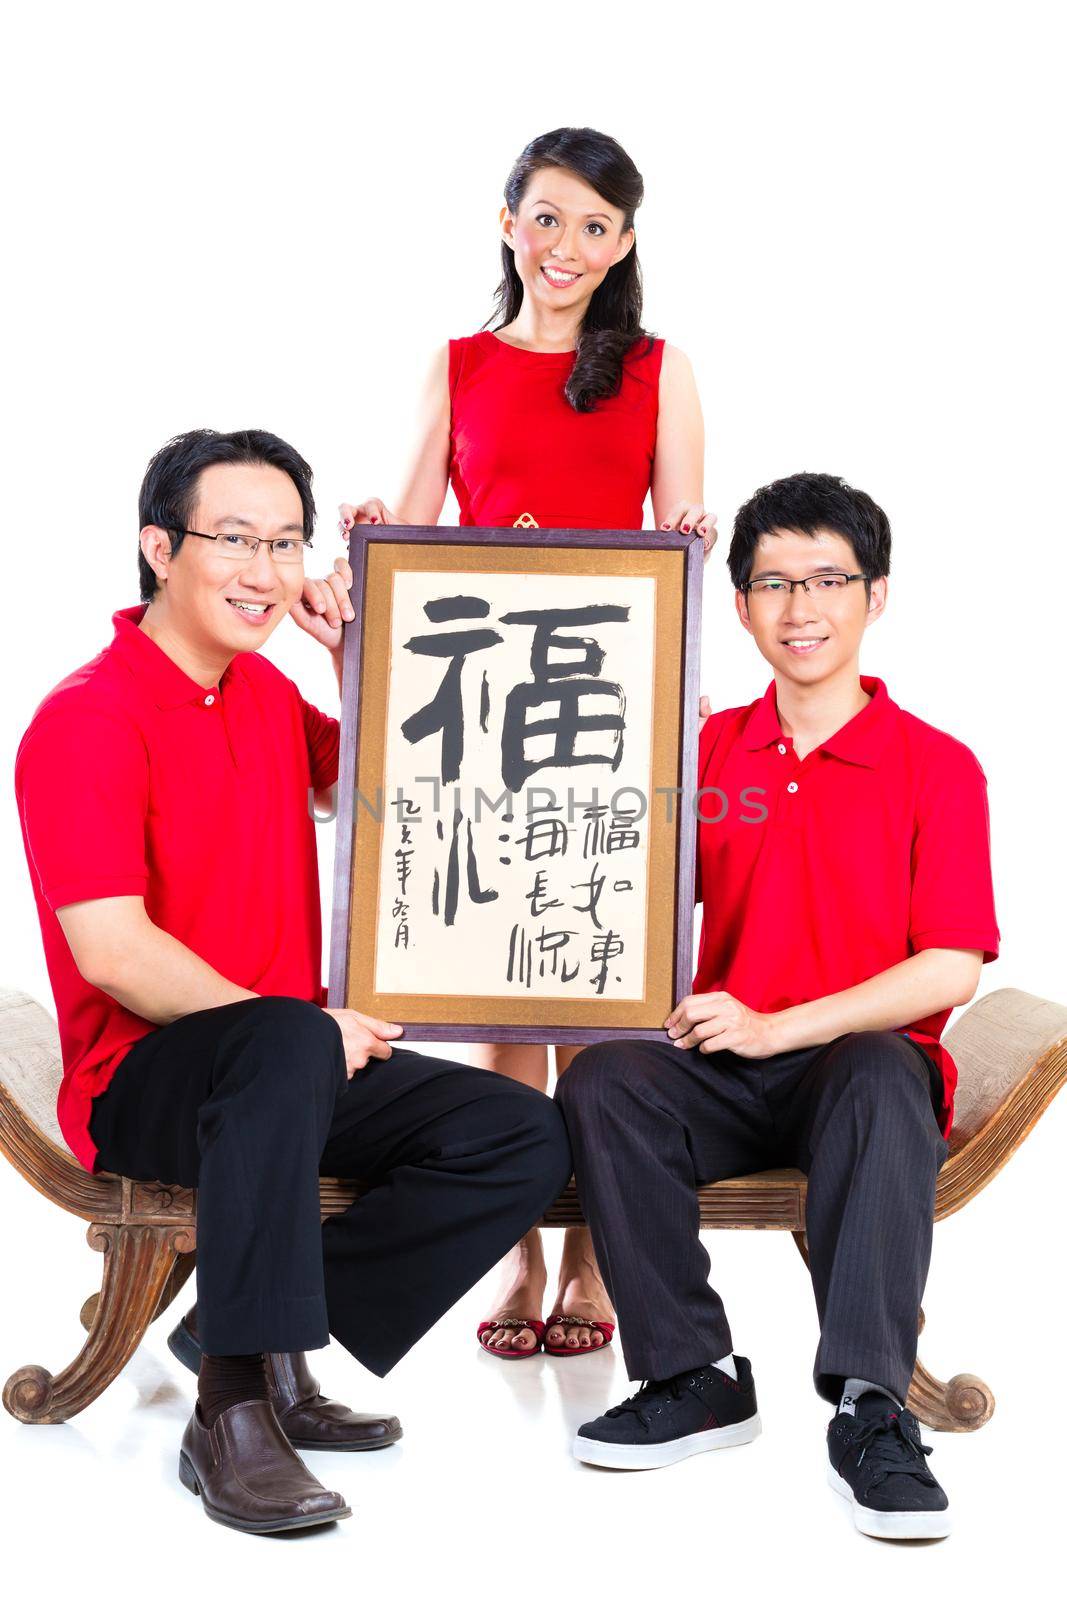 Family celebrates Chinese new year with traditional calligraphy, wearing red